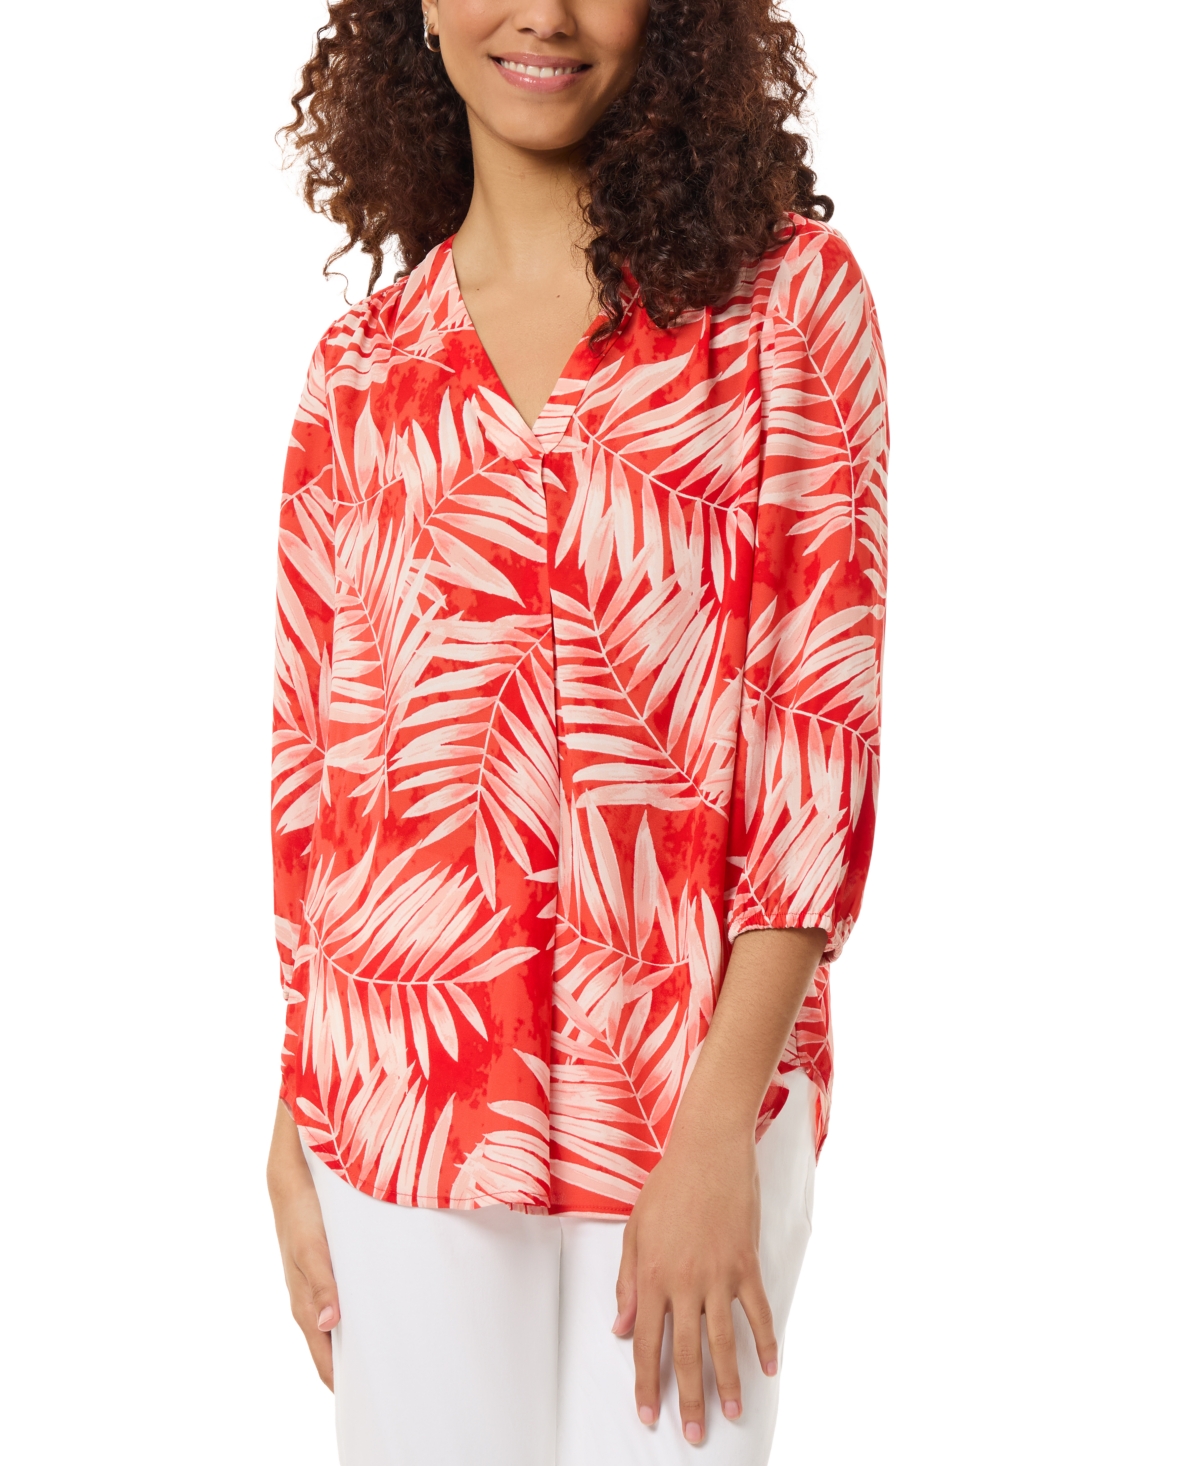 Women's Printed Kelly V-Neck Blouse - Coral Sun